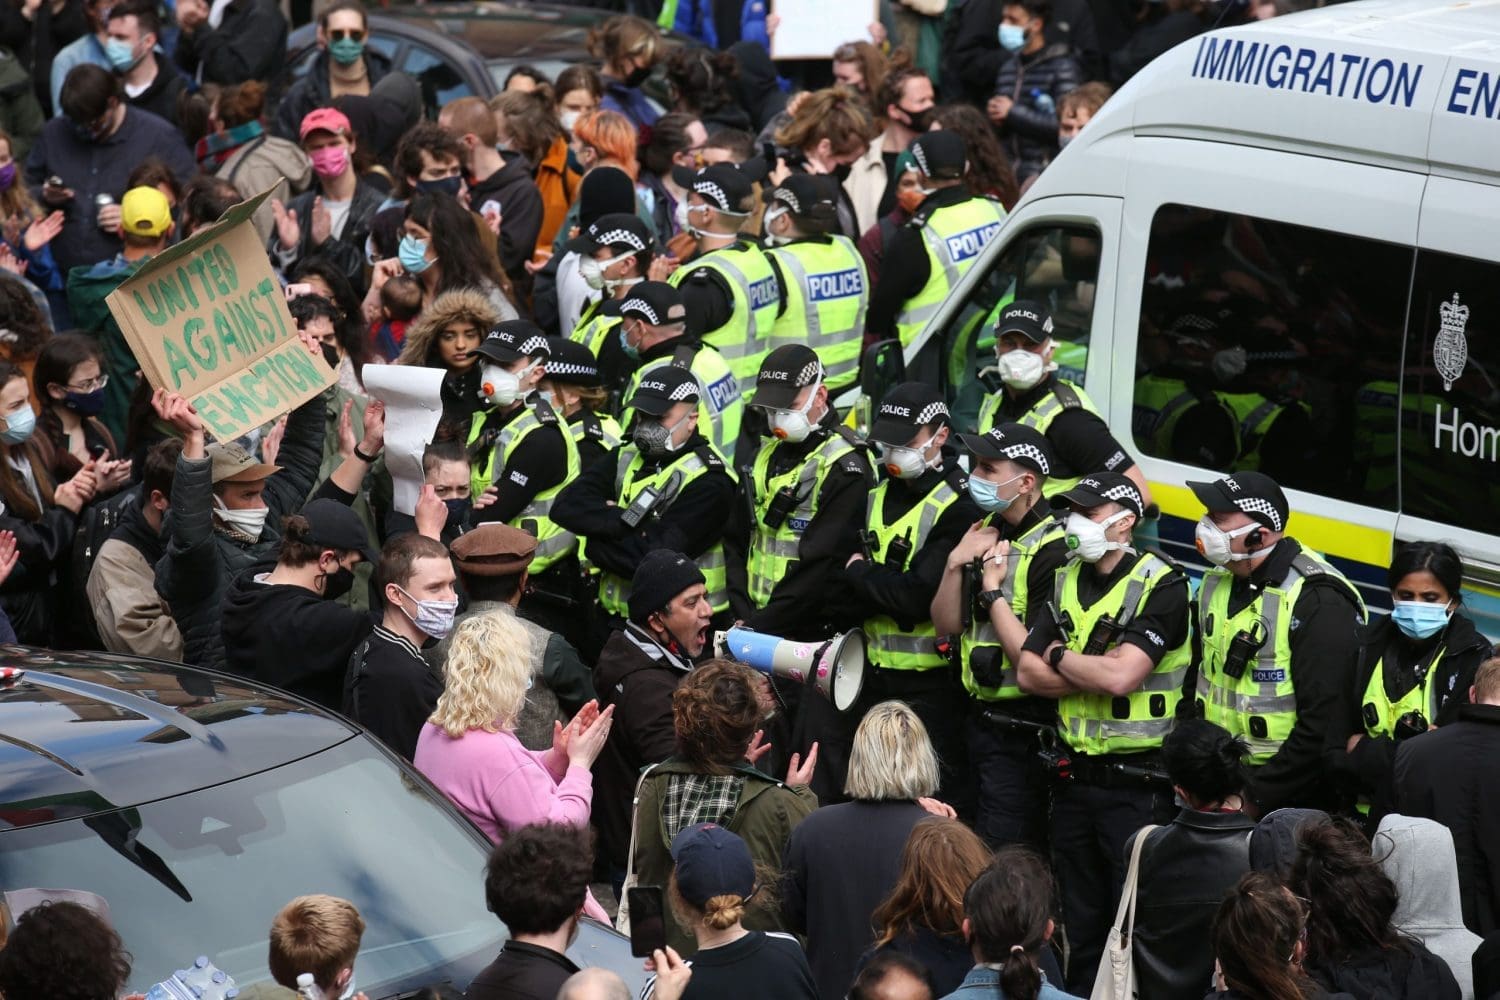 A ring of police officers dwarfed by a crowd of people supporting the men arrested